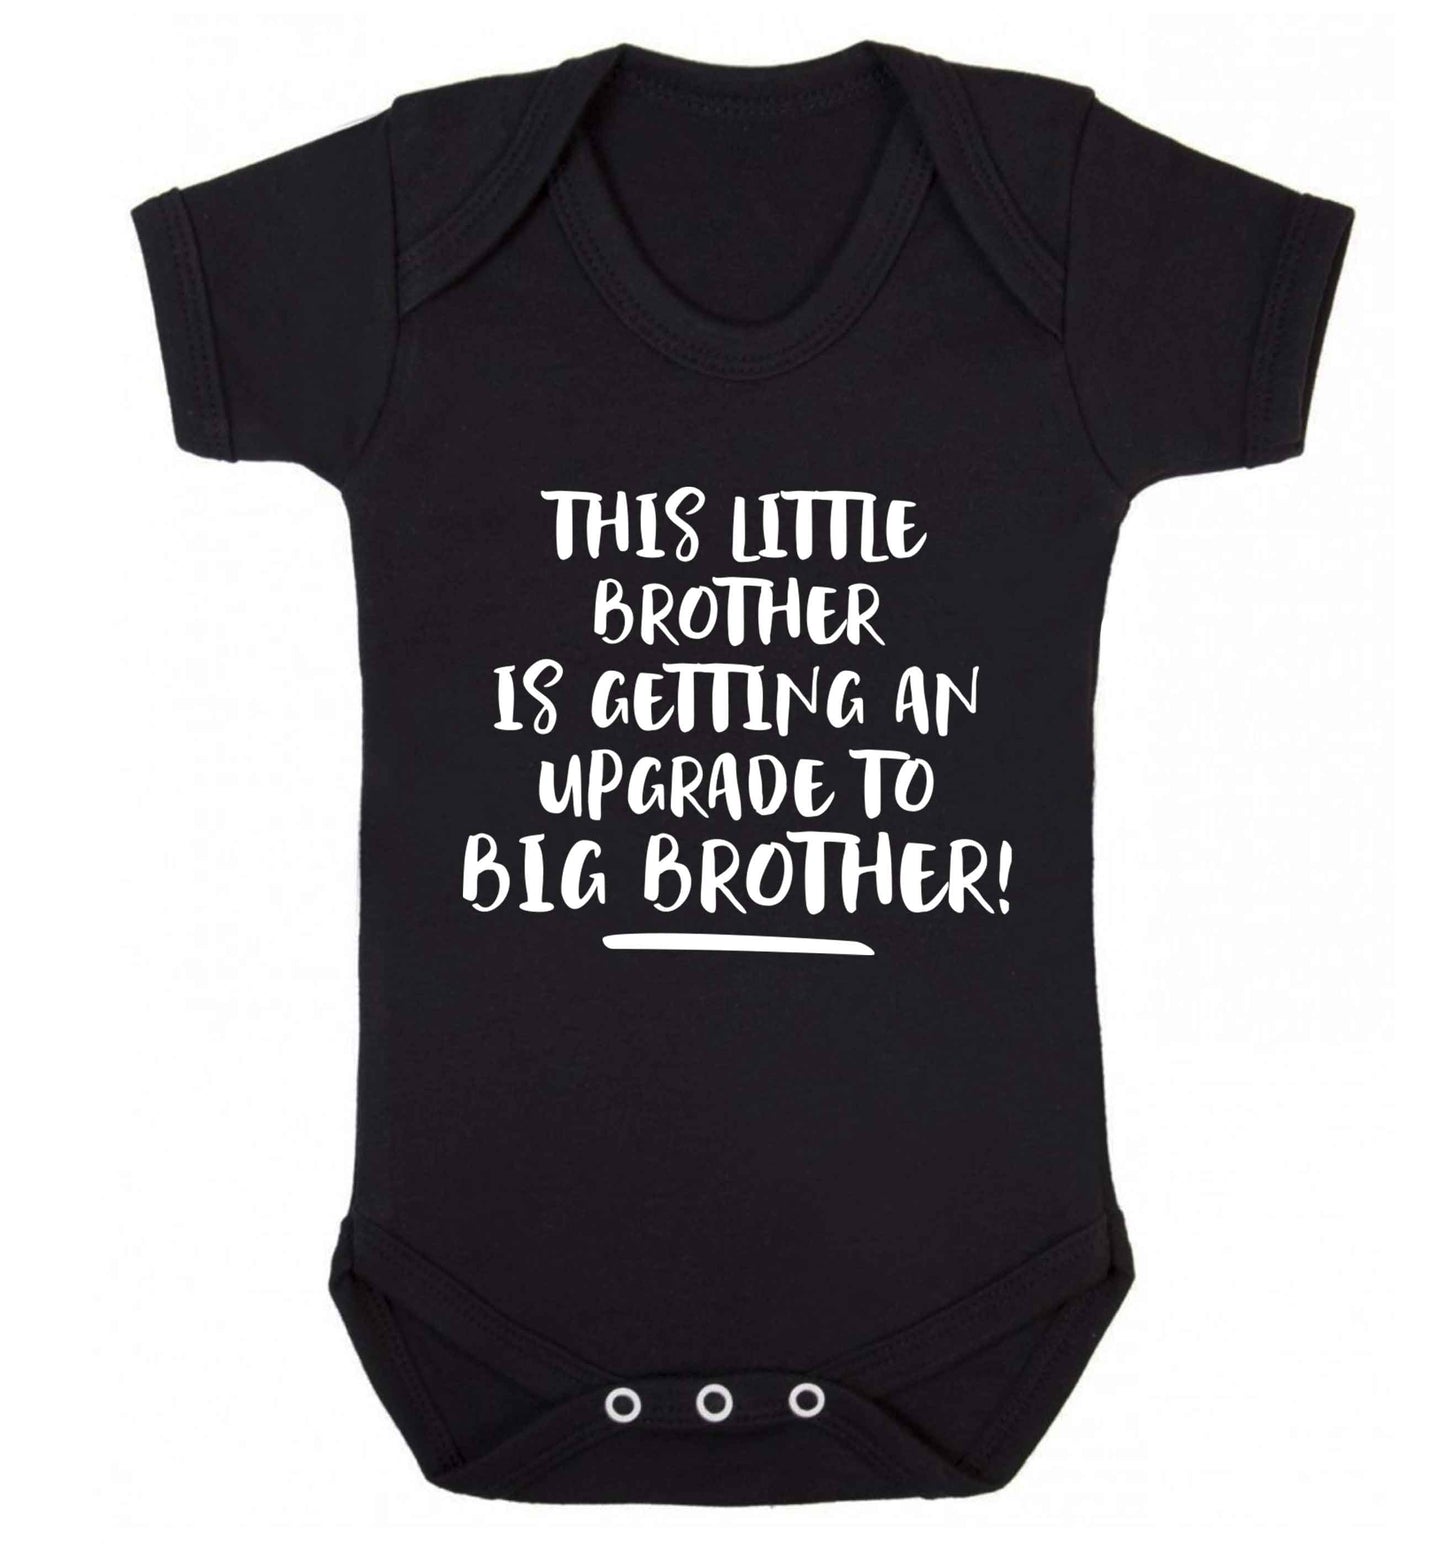 This little brother is getting an upgrade to big brother! Baby Vest black 18-24 months